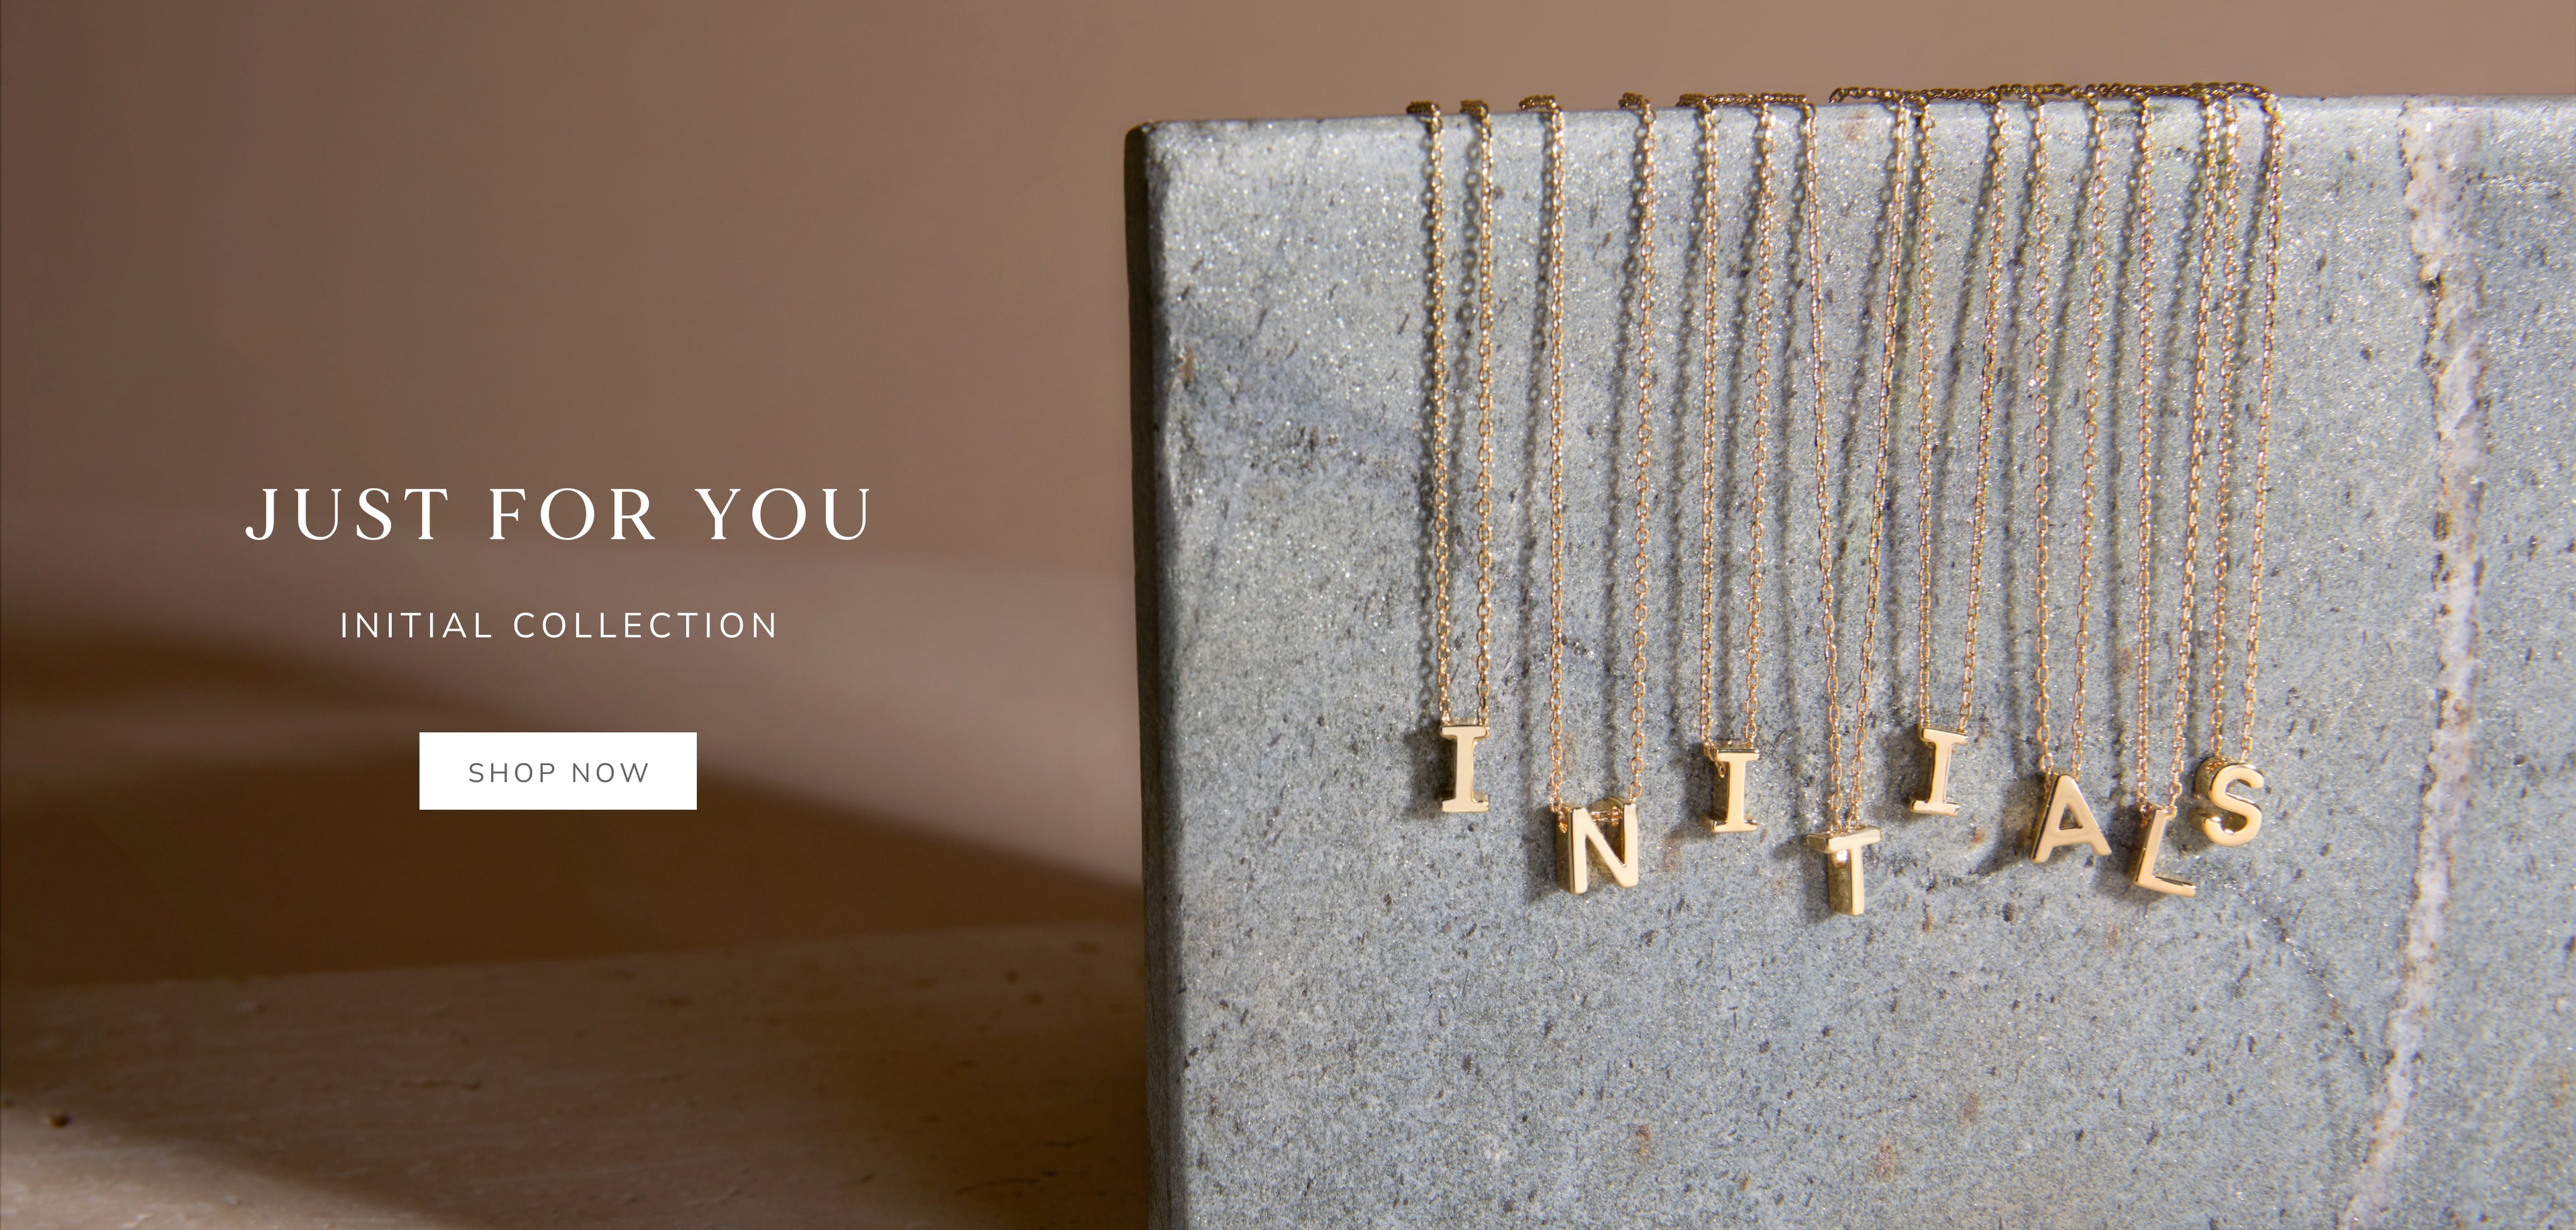 Desktop Banner New Just For You Initial Collection Necklaces